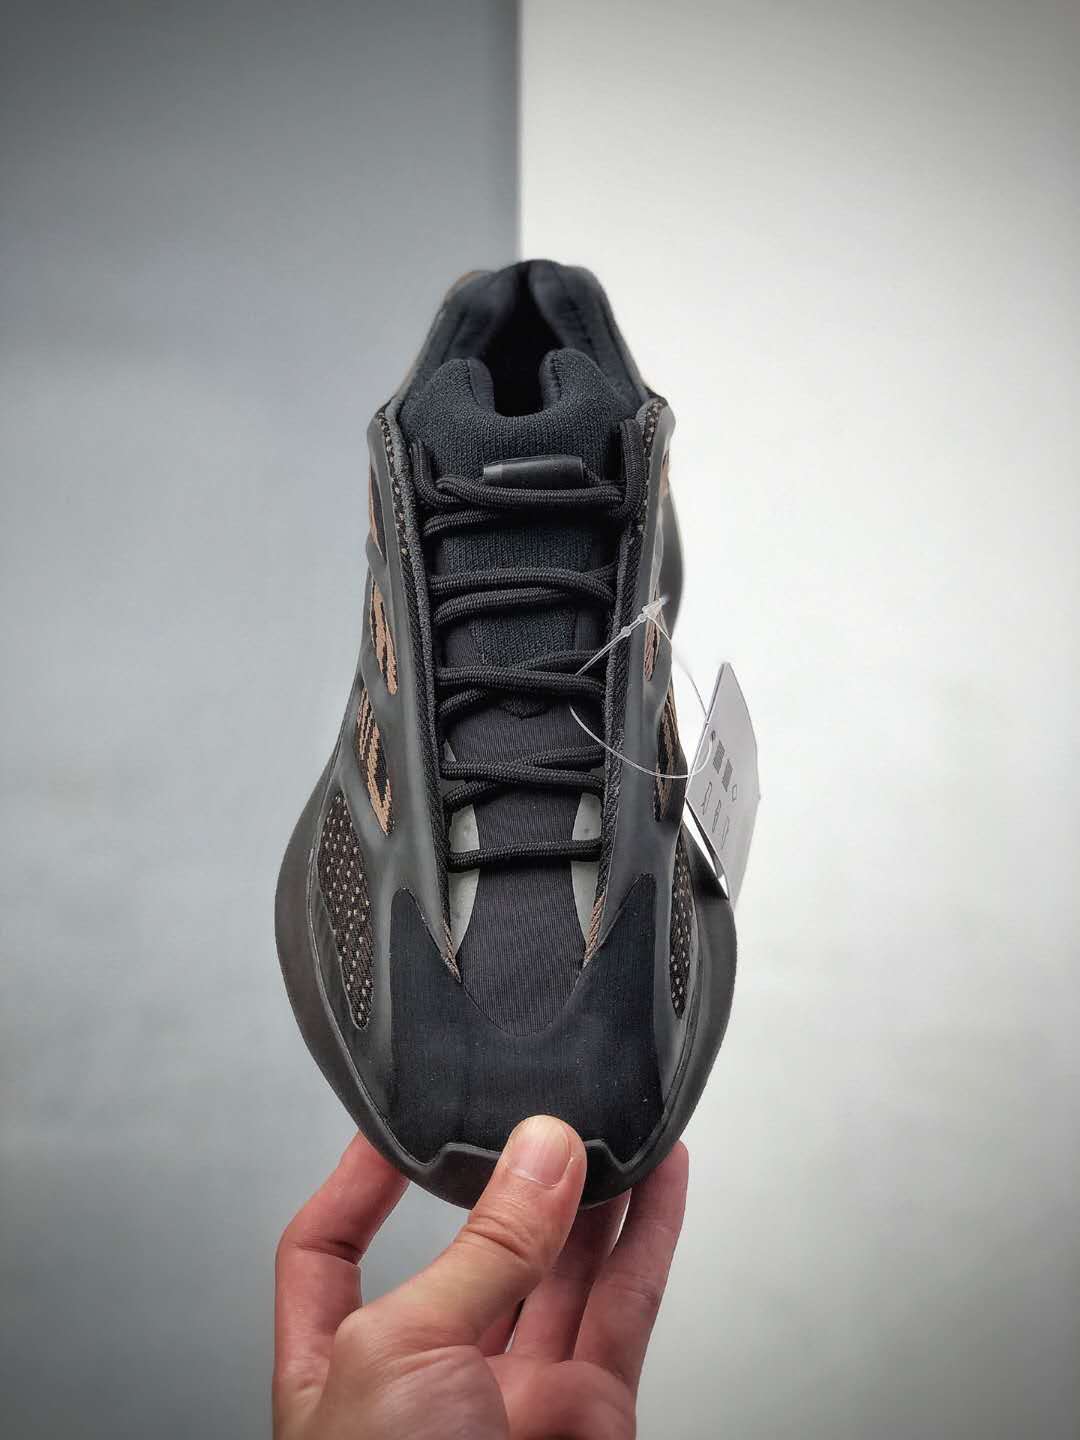 Adidas Yeezy 700 V3 'Clay Brown' GY0189 - Stylish Sneakers with Bold Aesthetic